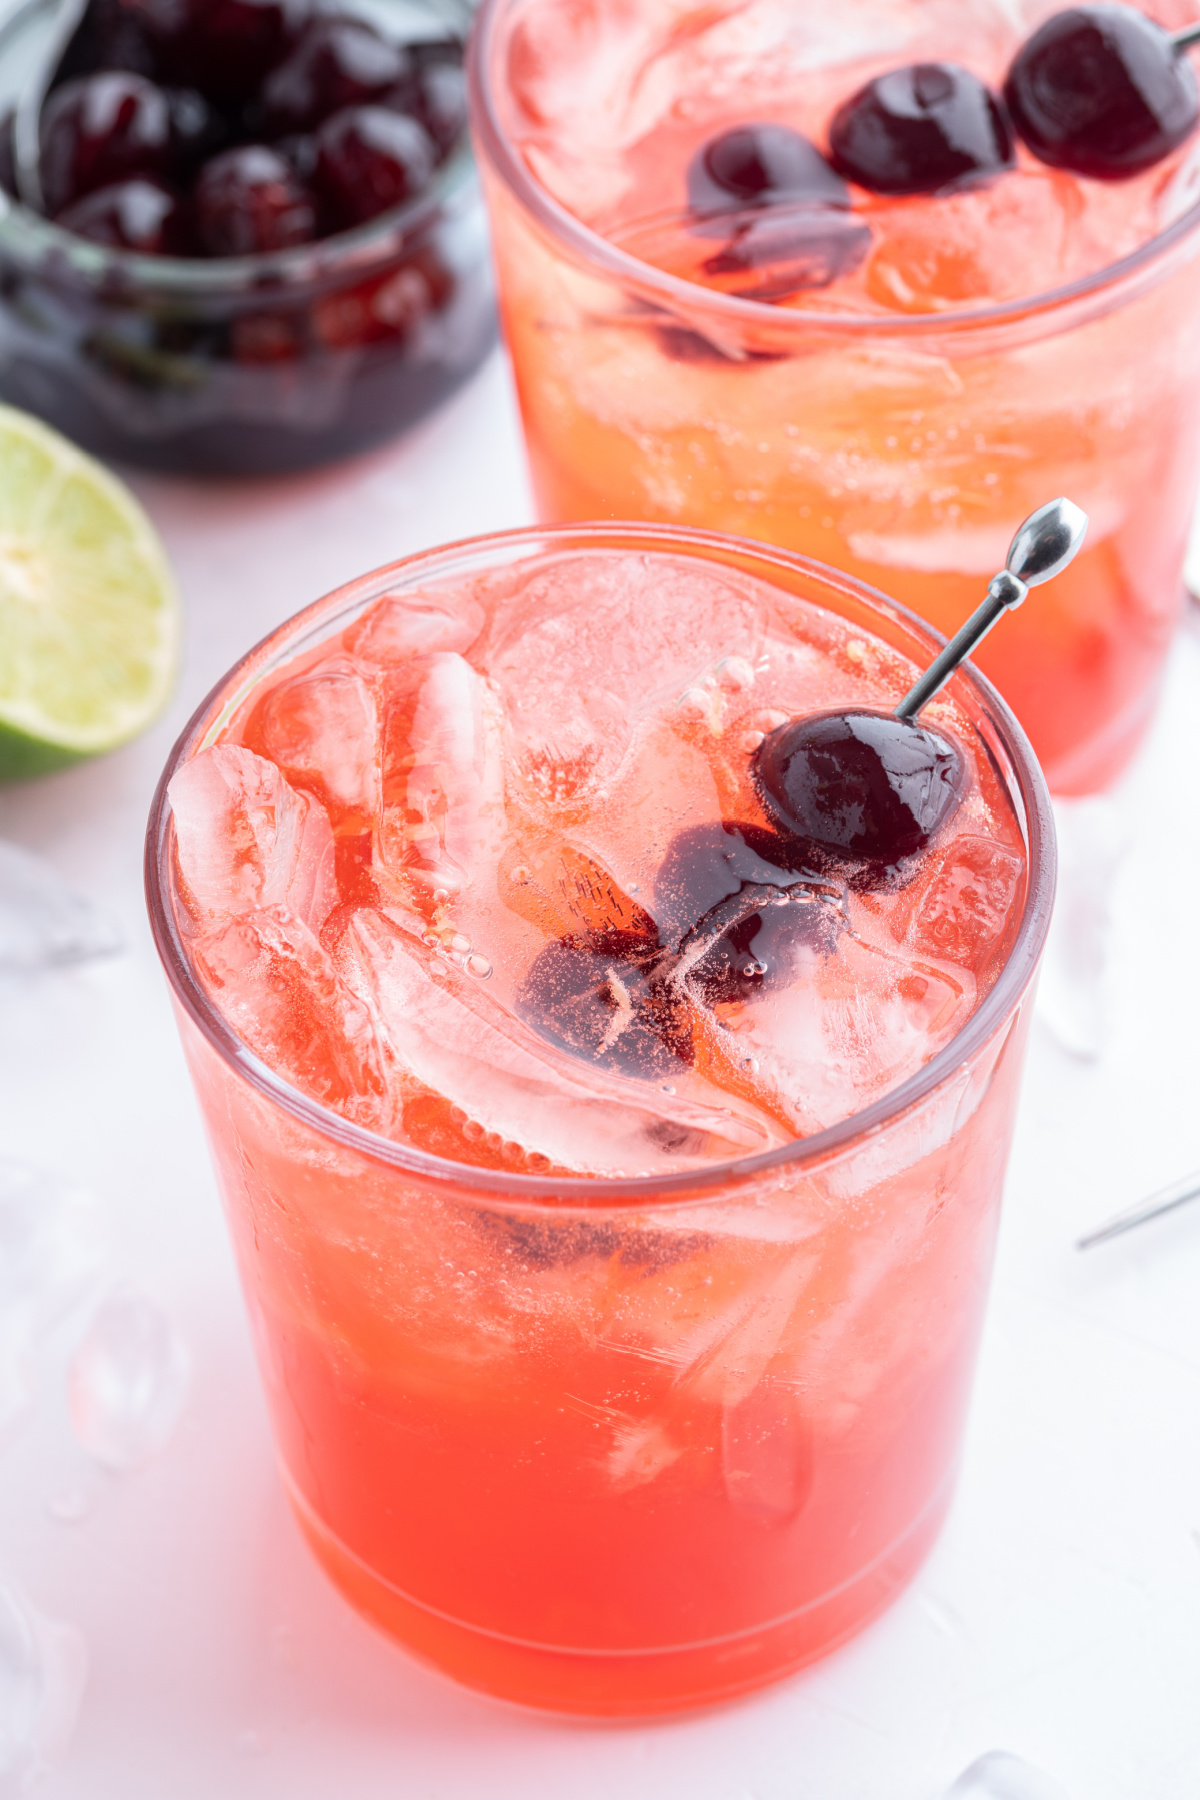 tequila shirley temples with cherry garnishes